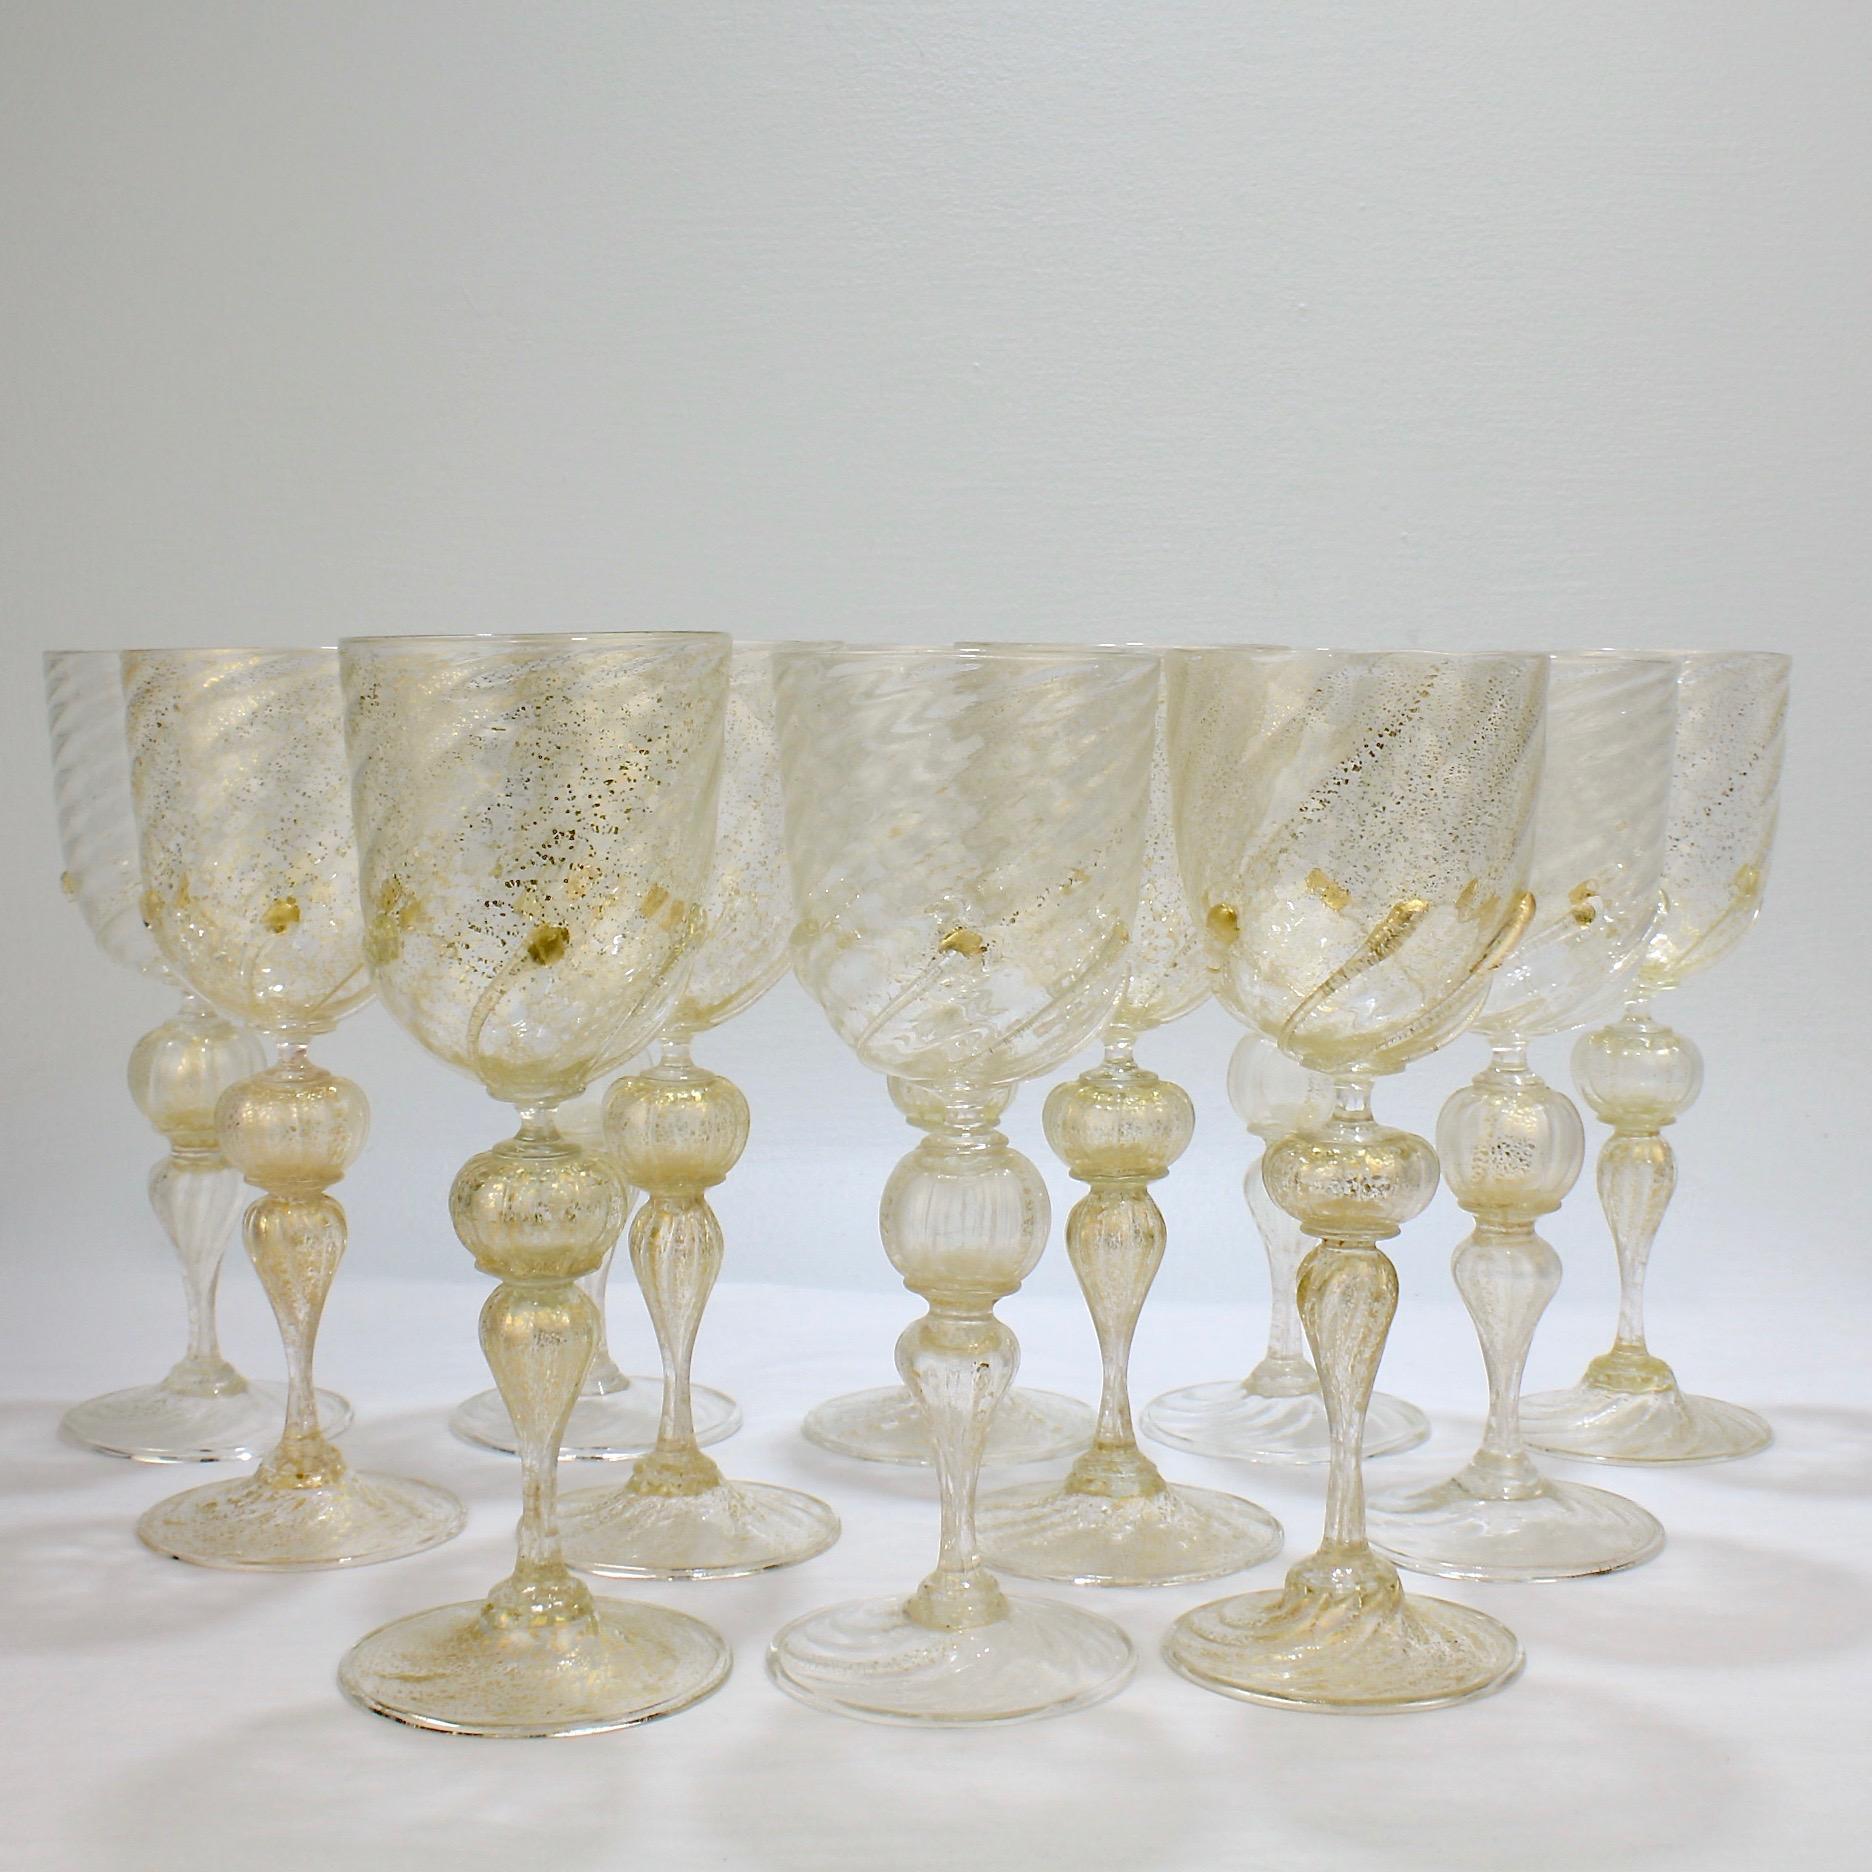 A vintage set of 12 large-sized Venetian glass water goblets or wine glasses.

Attributed to Salviati.

Finely blown with applied swirled prunts to the base of the cups and gold inclusions throughout.

Rare large-size goblets of the finest